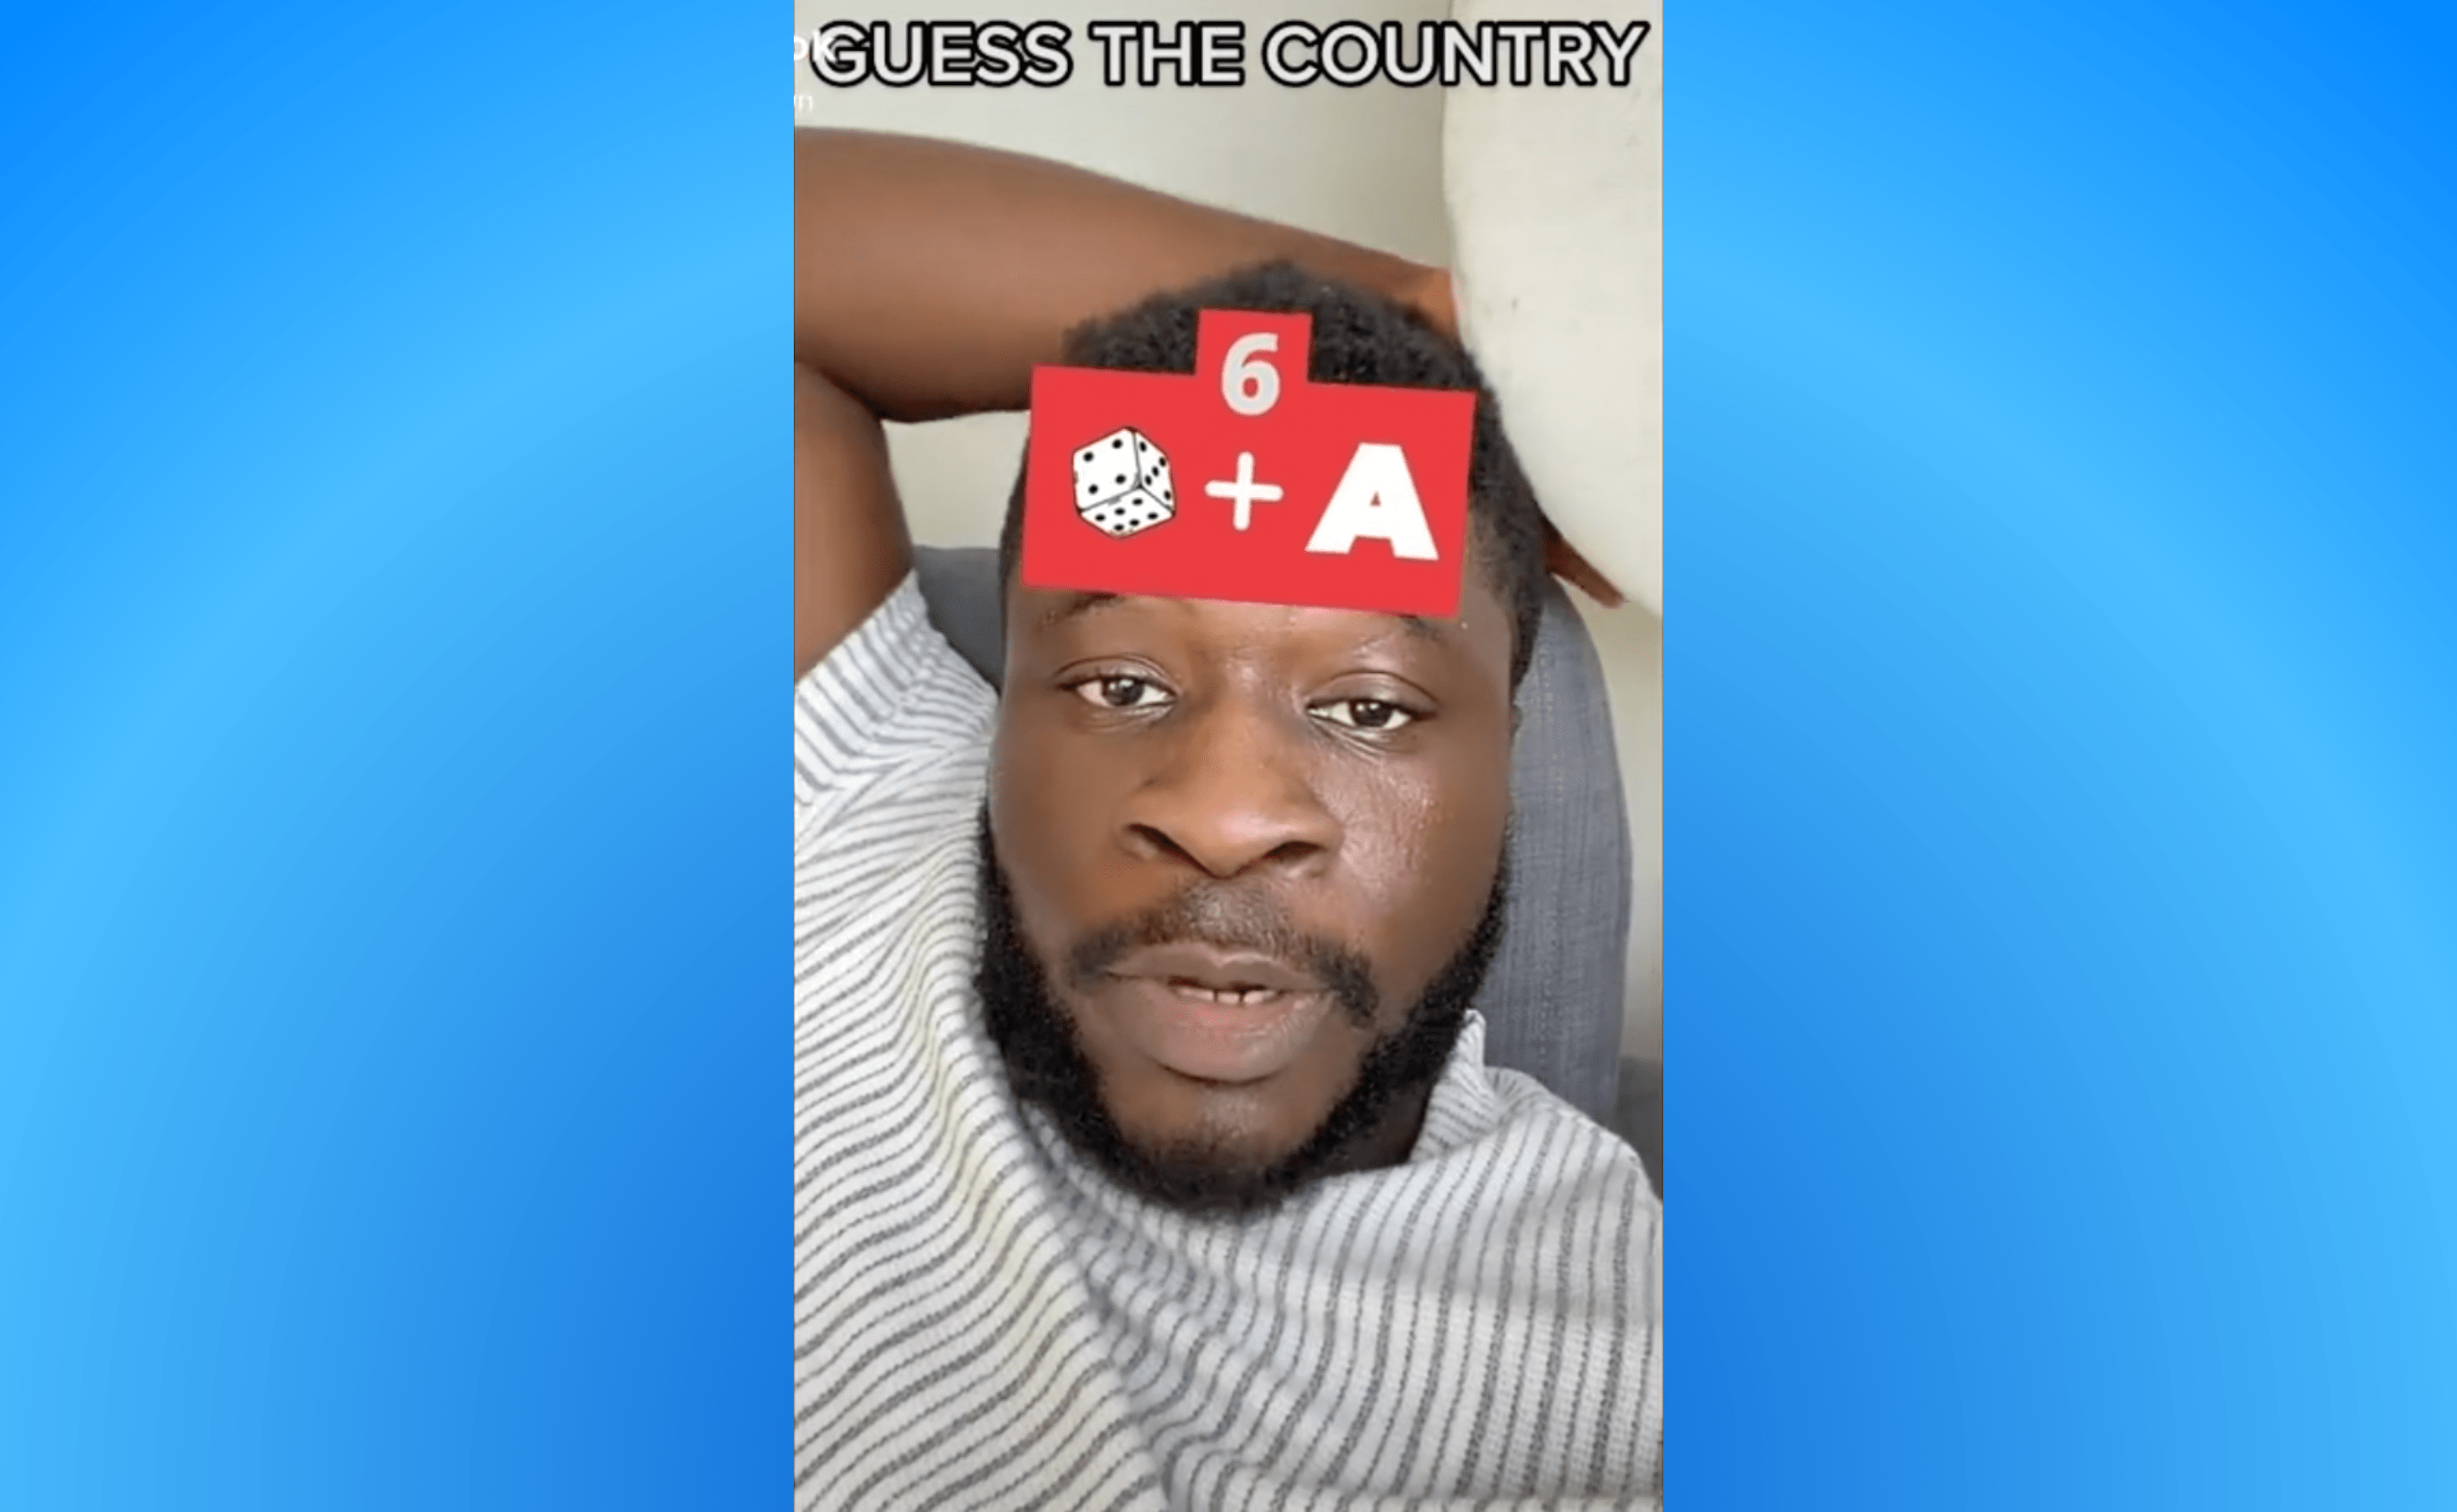 TikTok Challenge Idea: Guess the country